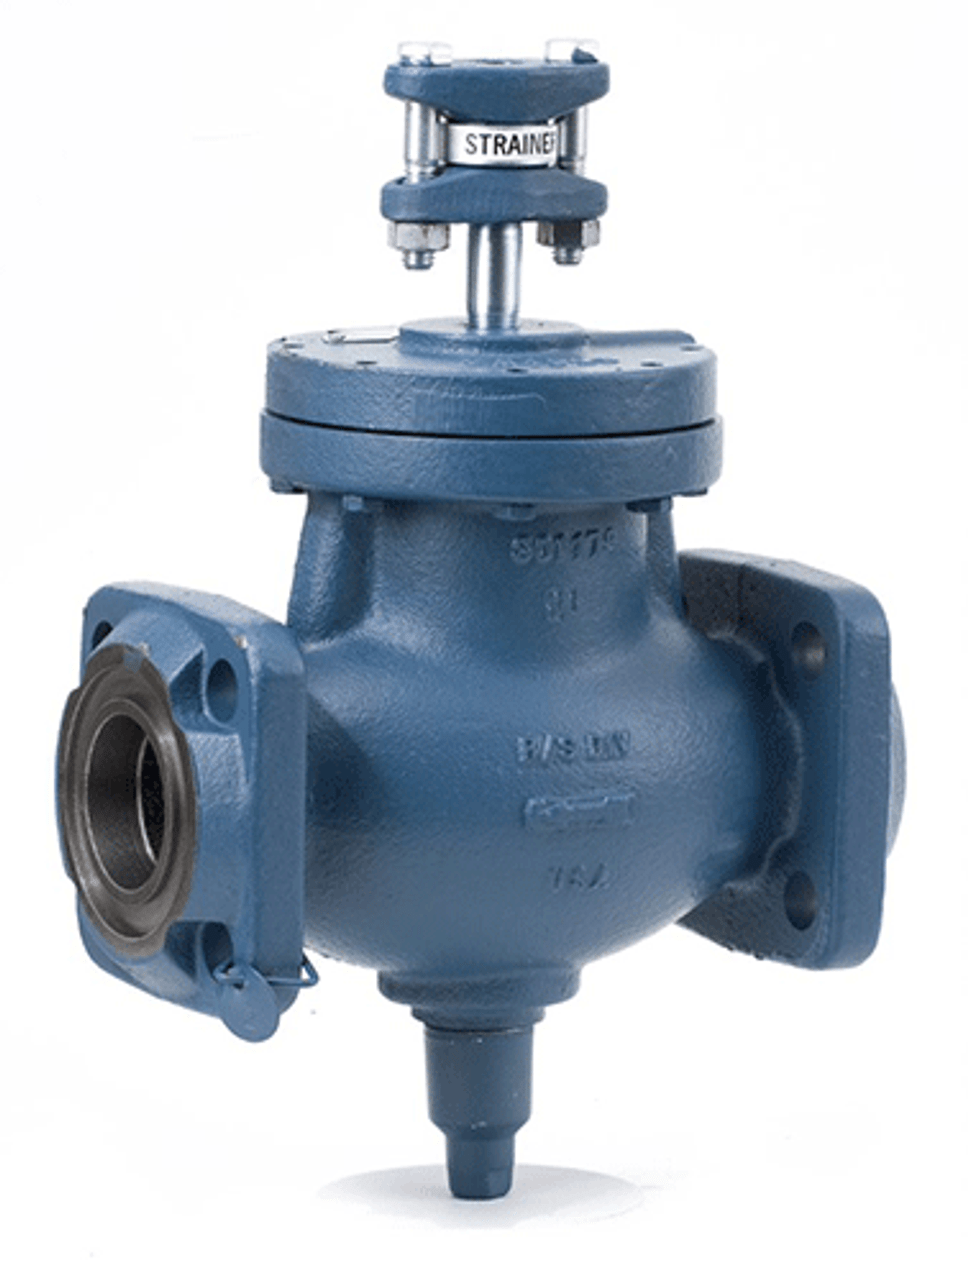 CK265F10S65NSN - 2-1/2" CK-2 Gas Powered Suction Stop Valve With 2-1/2" SW Flanges, Less Pilot